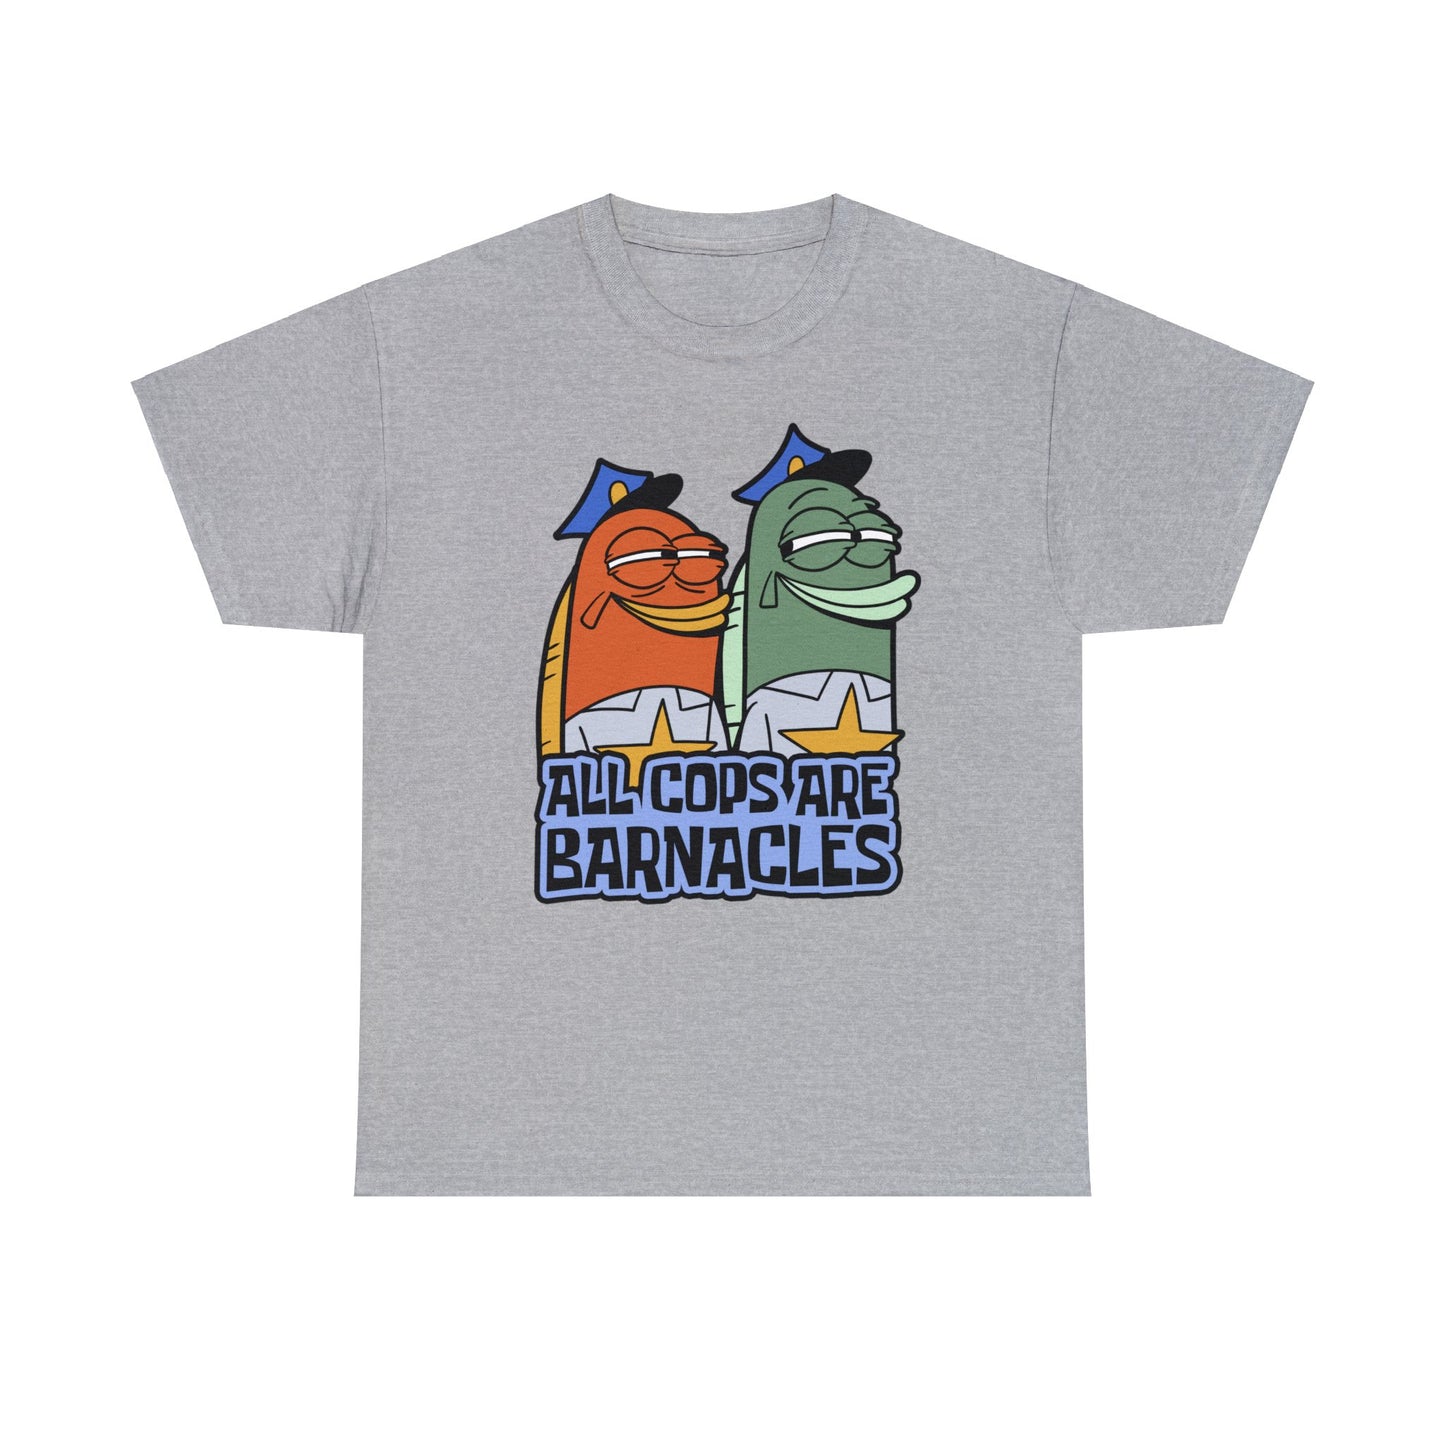 All Cops Are Barnacles 2.0 t-shirt